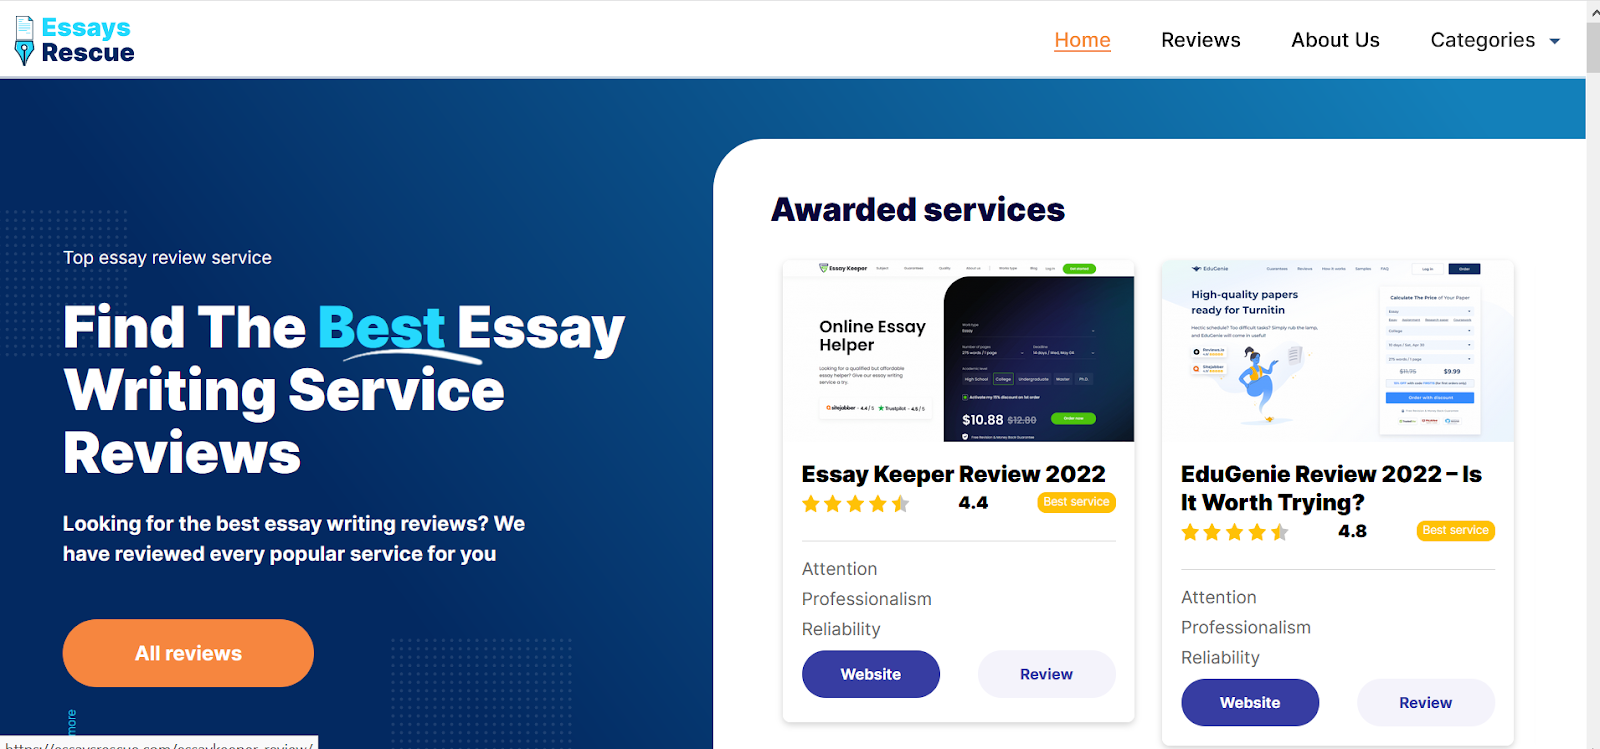 college essay writing service in usa